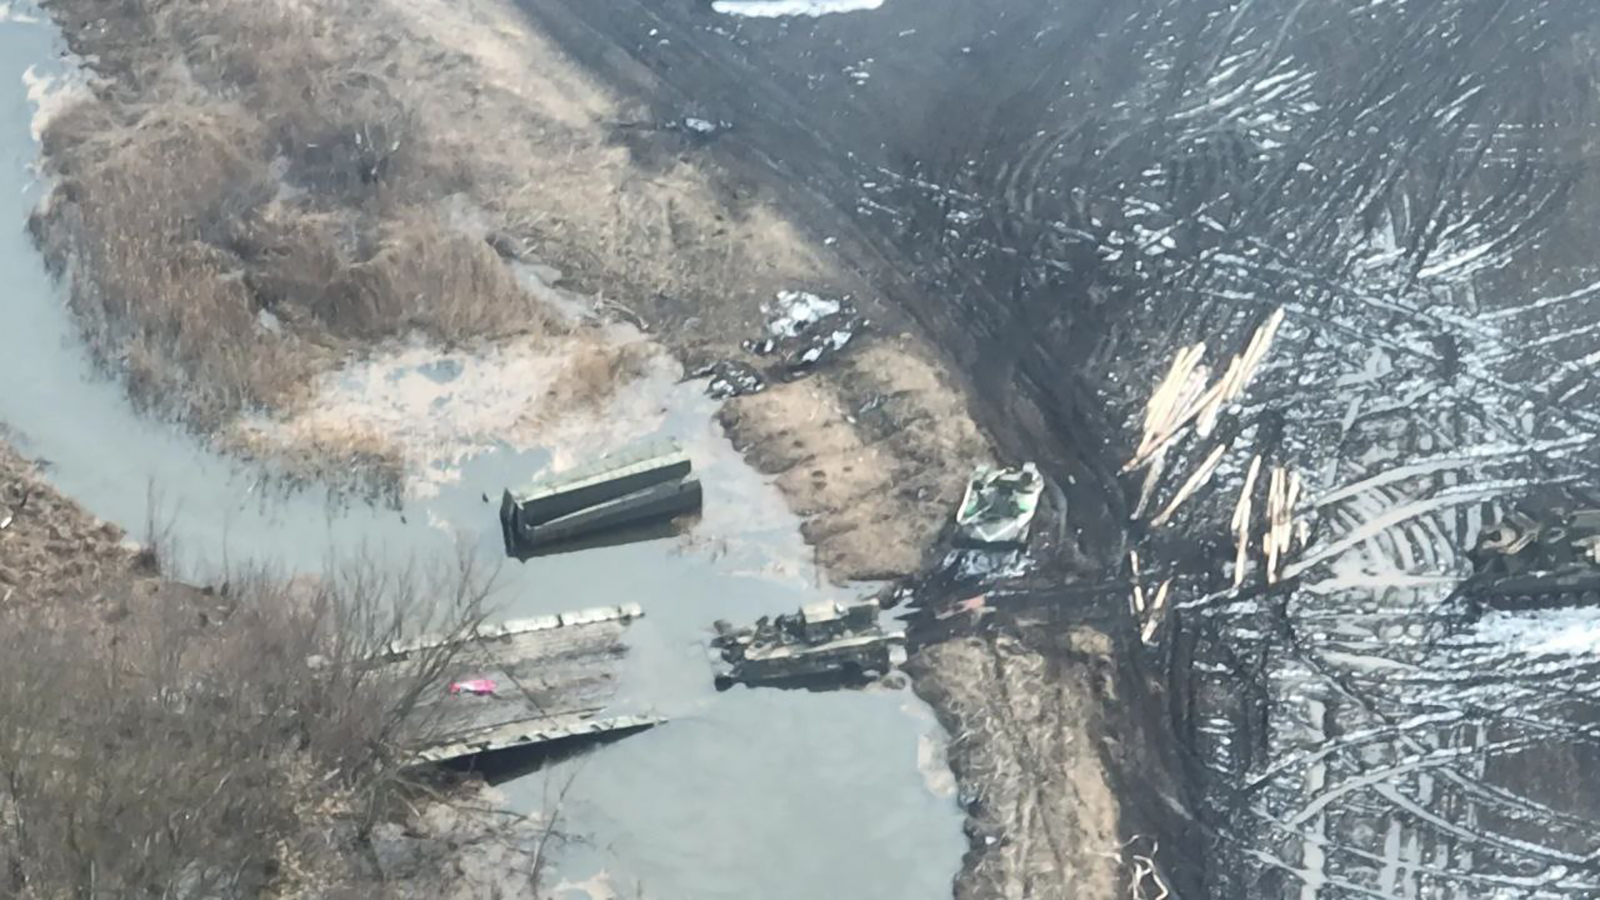 Satellite images show that the Ukrainians thwarted a Russian attempt towards Kyiv on a pontoon bridge